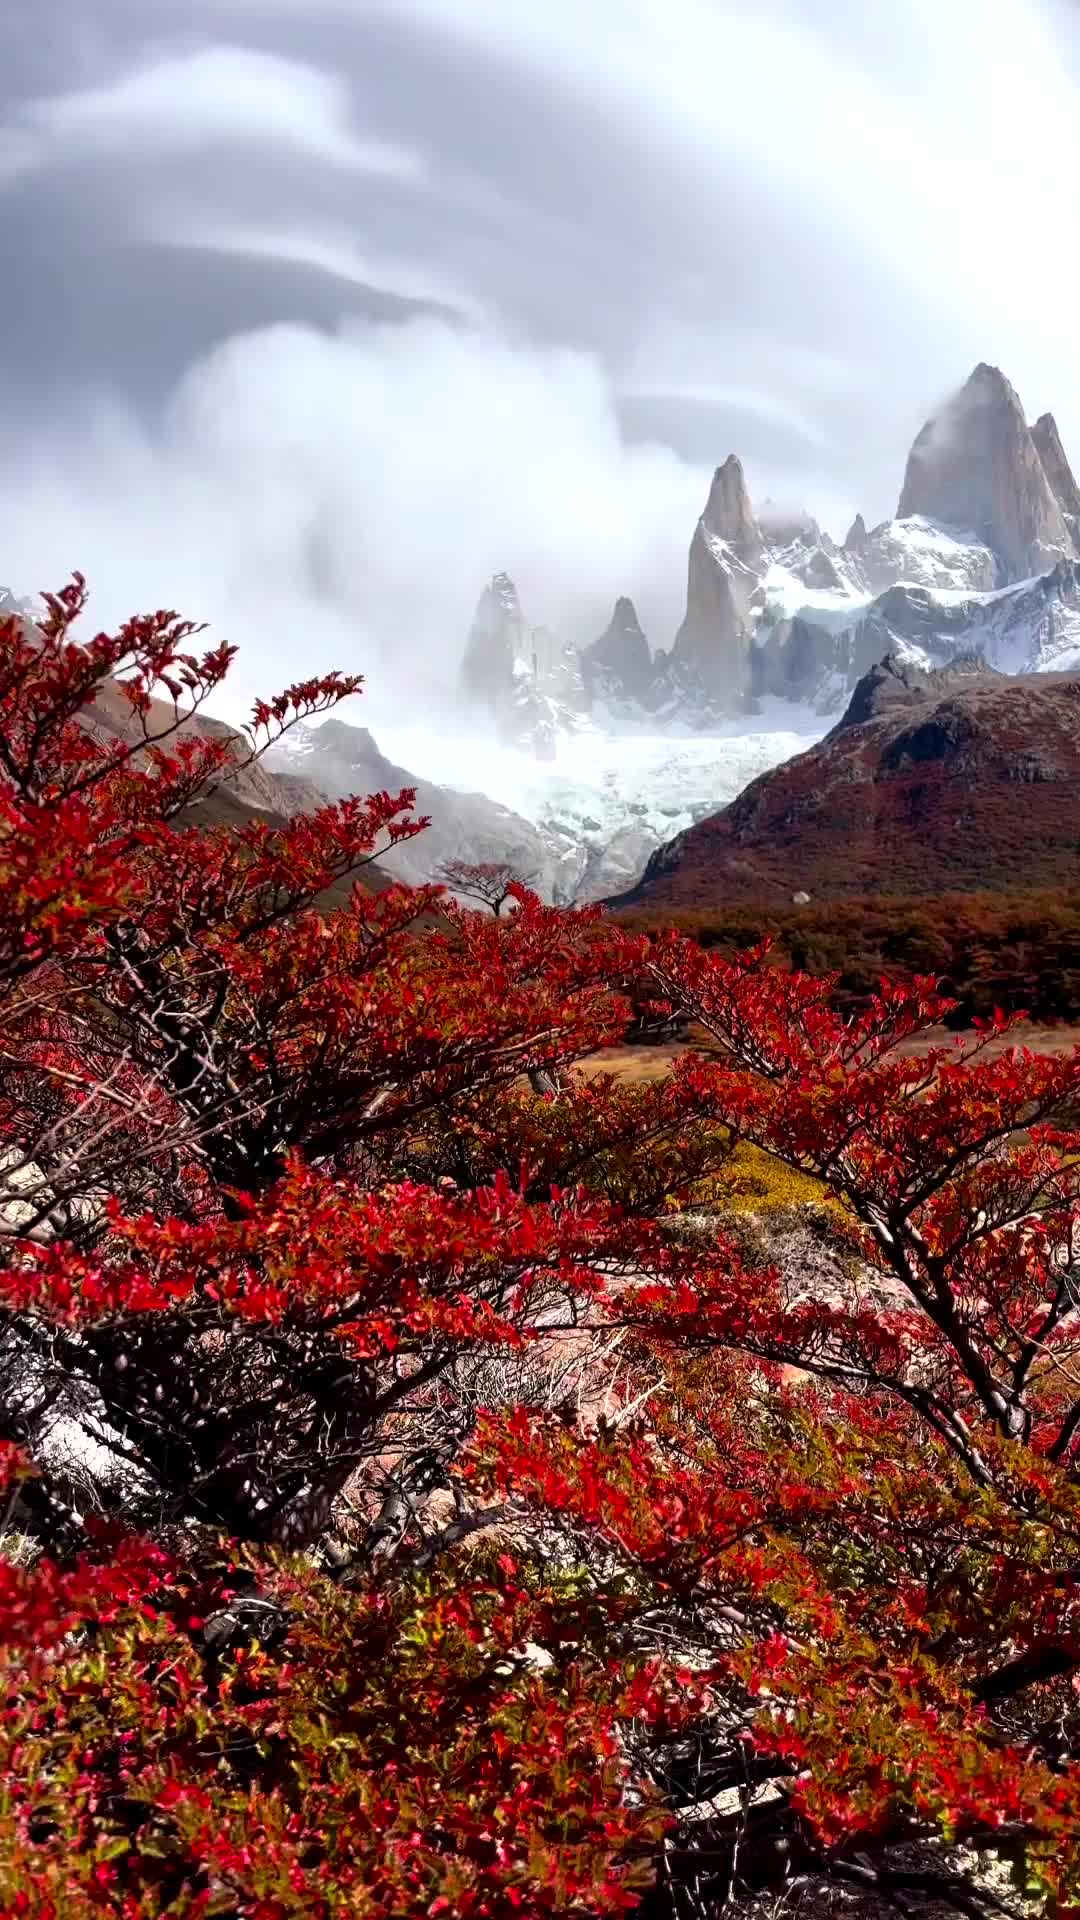 Why I Love Traveling and Photography in El Chaltén